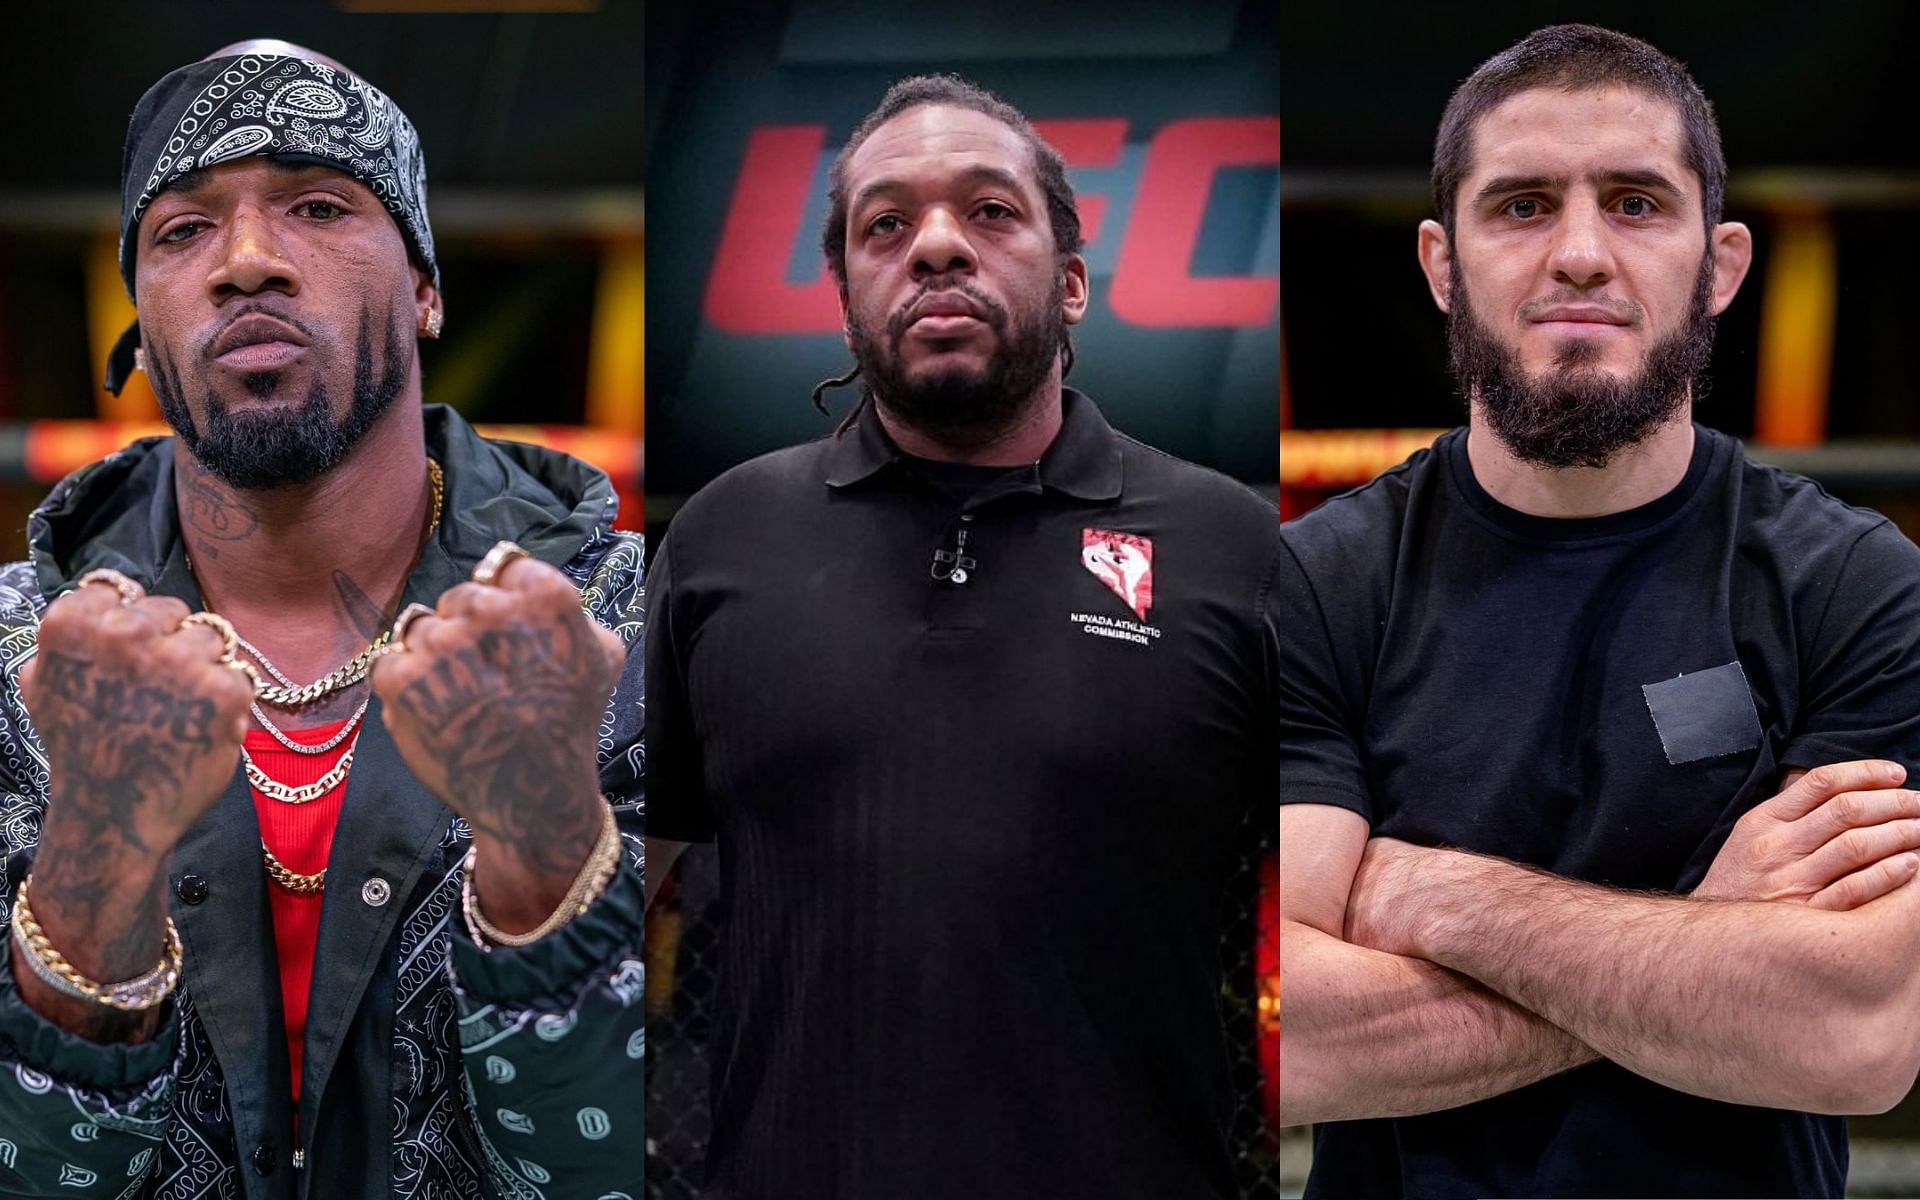 Bobby Green (left), Herb Dean (middle), Islam Makhachev (right) [Image credits: @ufc via Instagram]